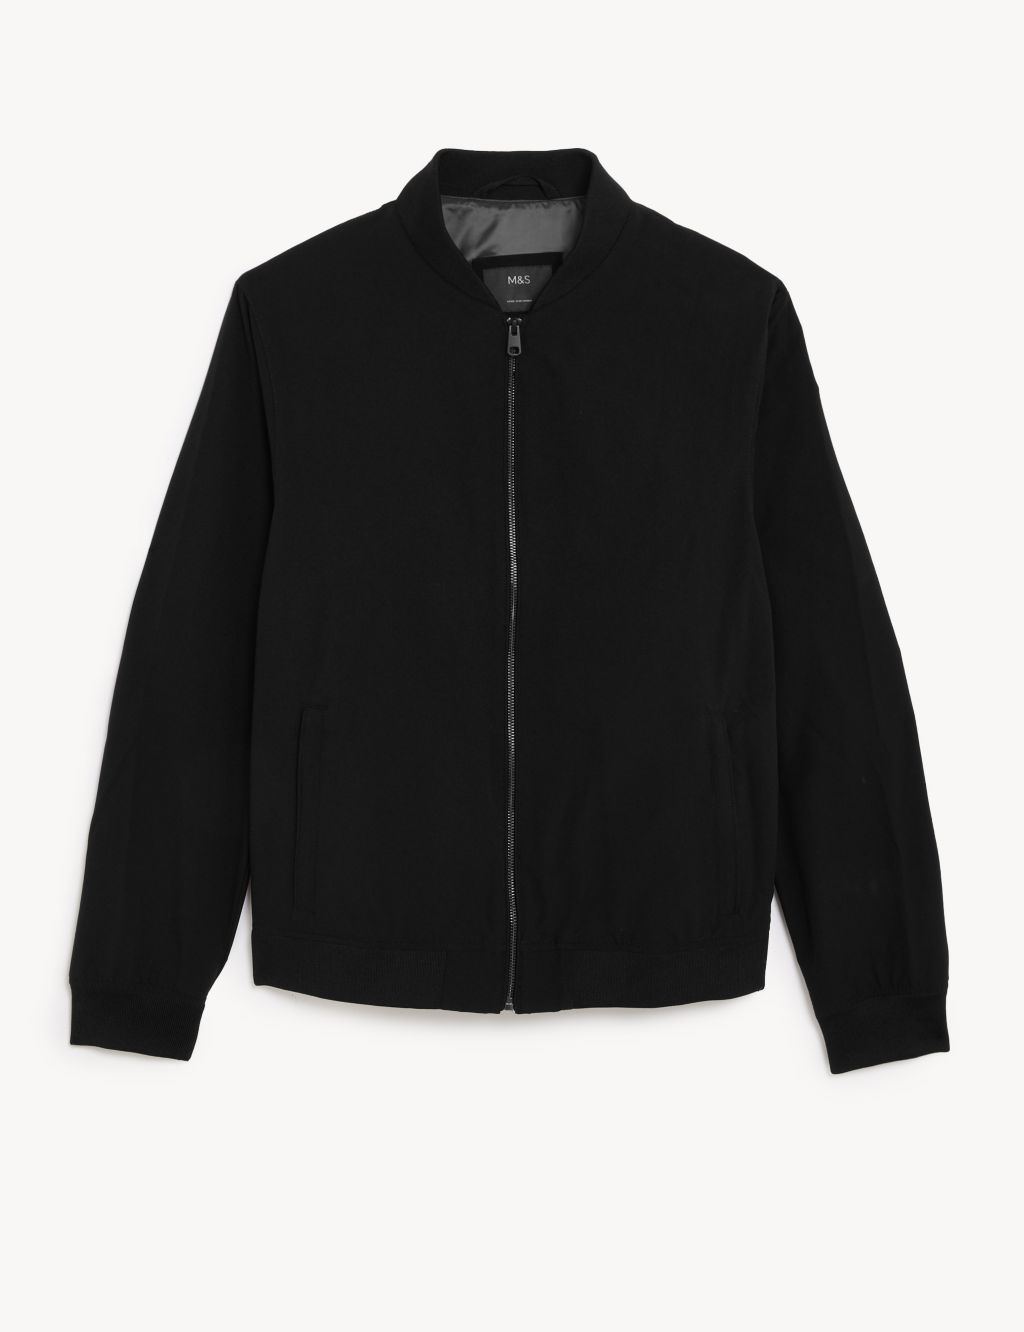 Bomber Jacket with Stormwear™ | M&S Collection | M&S